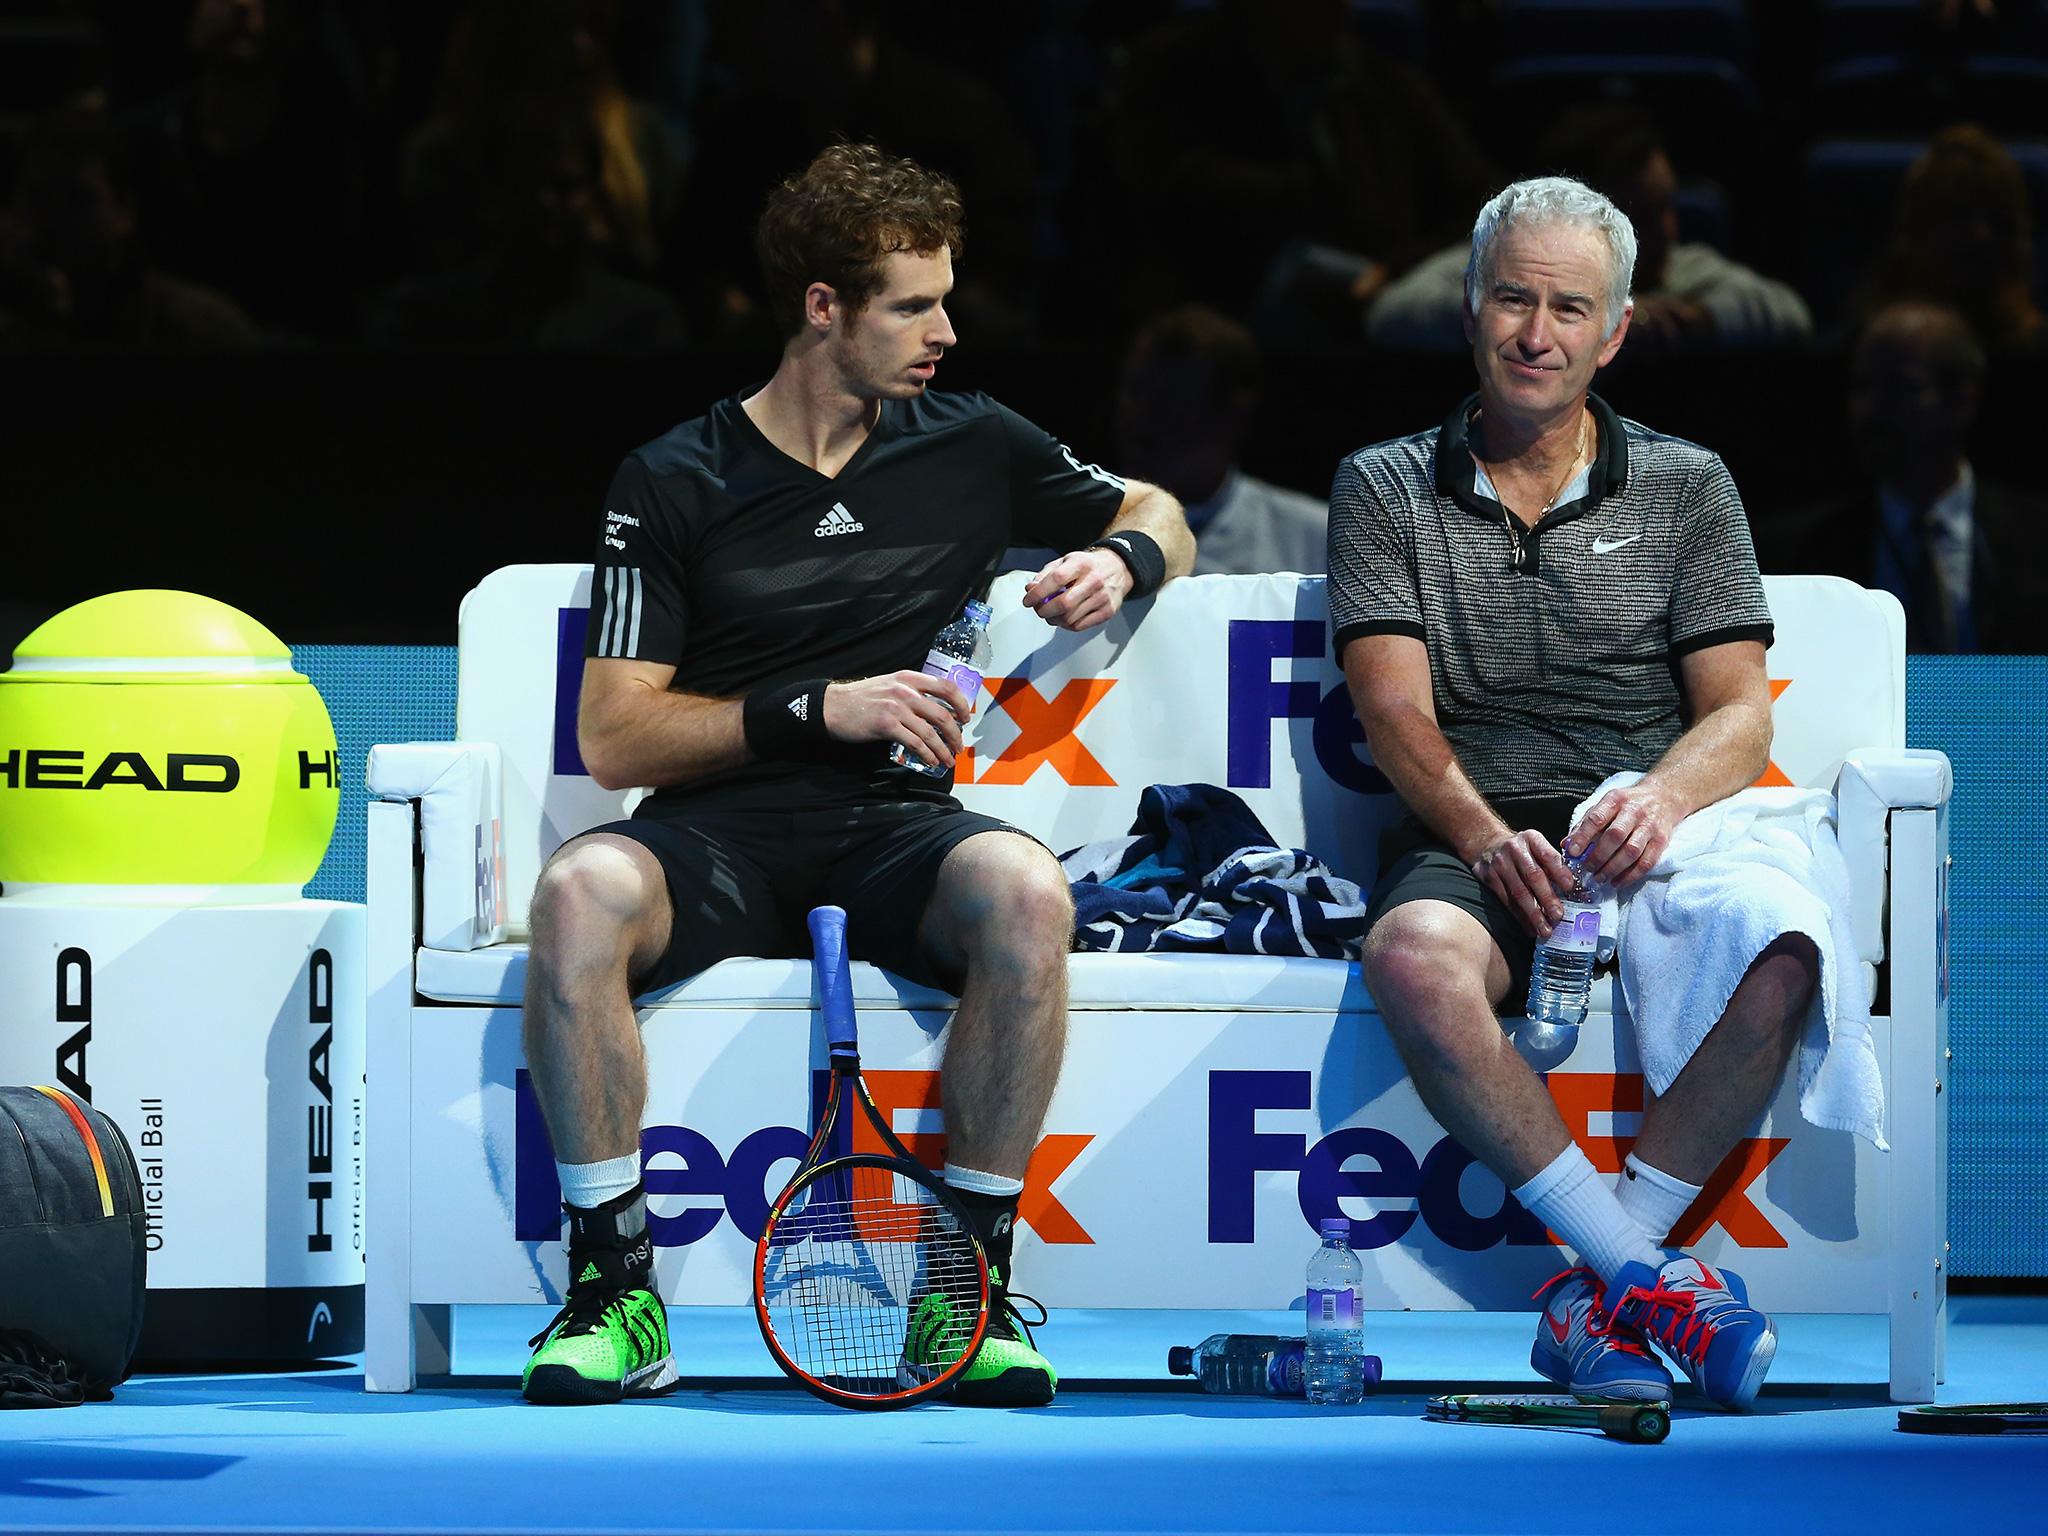 Murray and McEnroe during an exhibition match at the Barclays ATP World Tour Finals